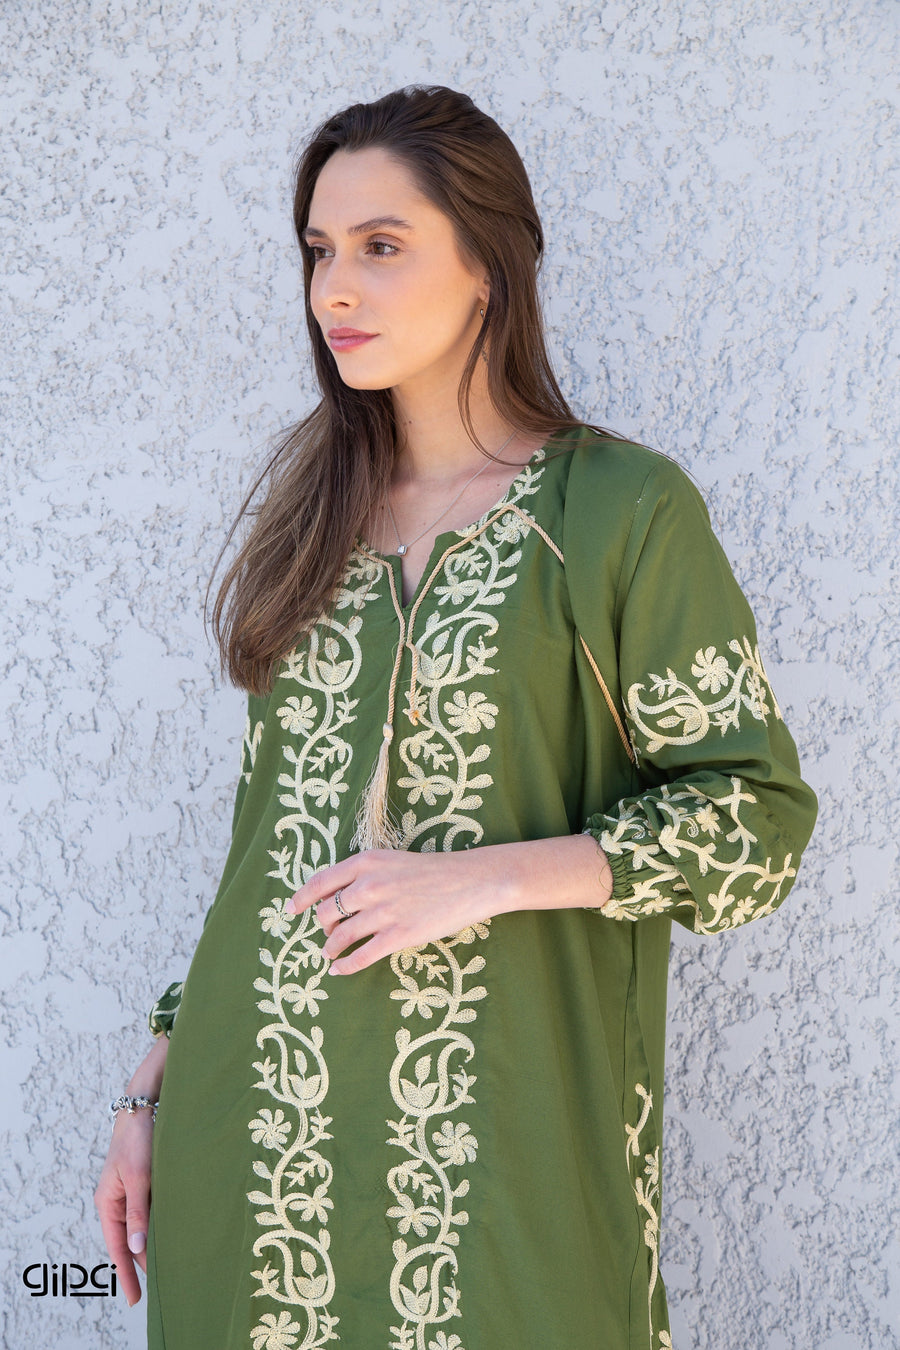 Boho Green embroidered cotton Caftan, summer caftan, embroidered Caftan dress, Caftan maxi dress, Caftans for women